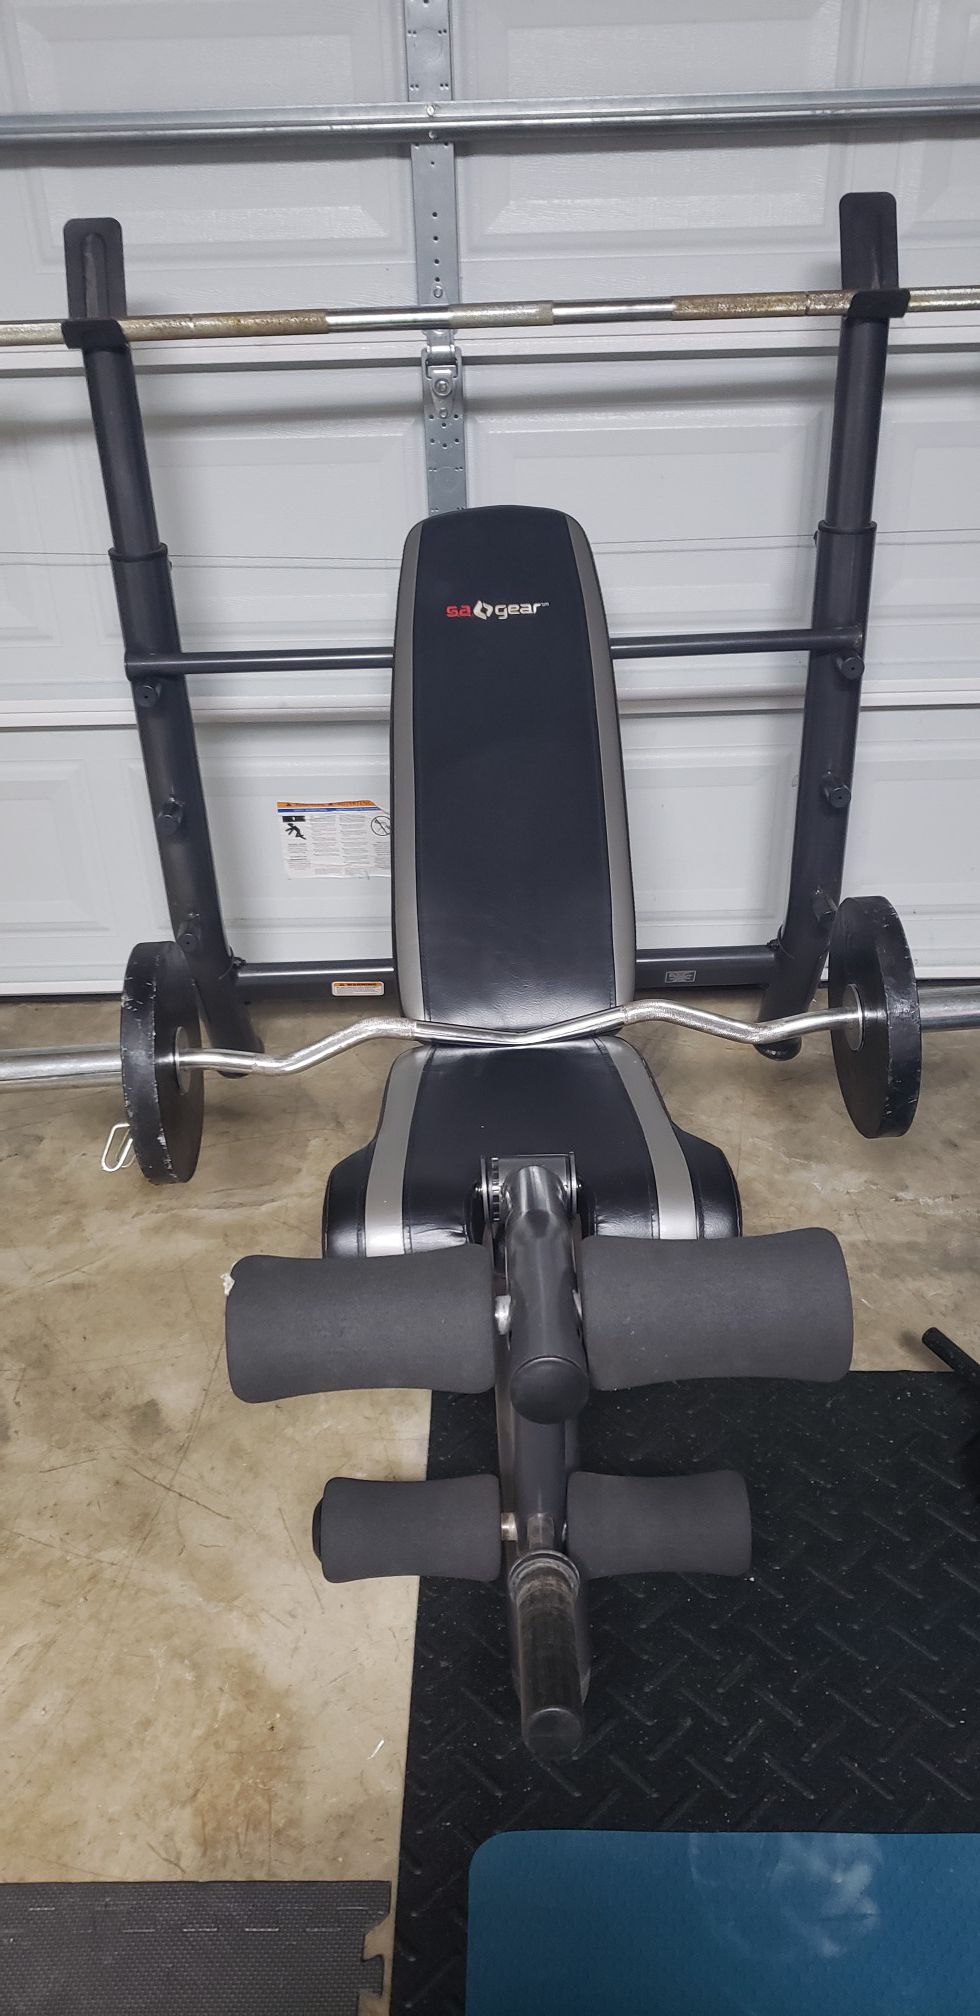 Weight bench with olympic bar. Plates sold at $1 per pound